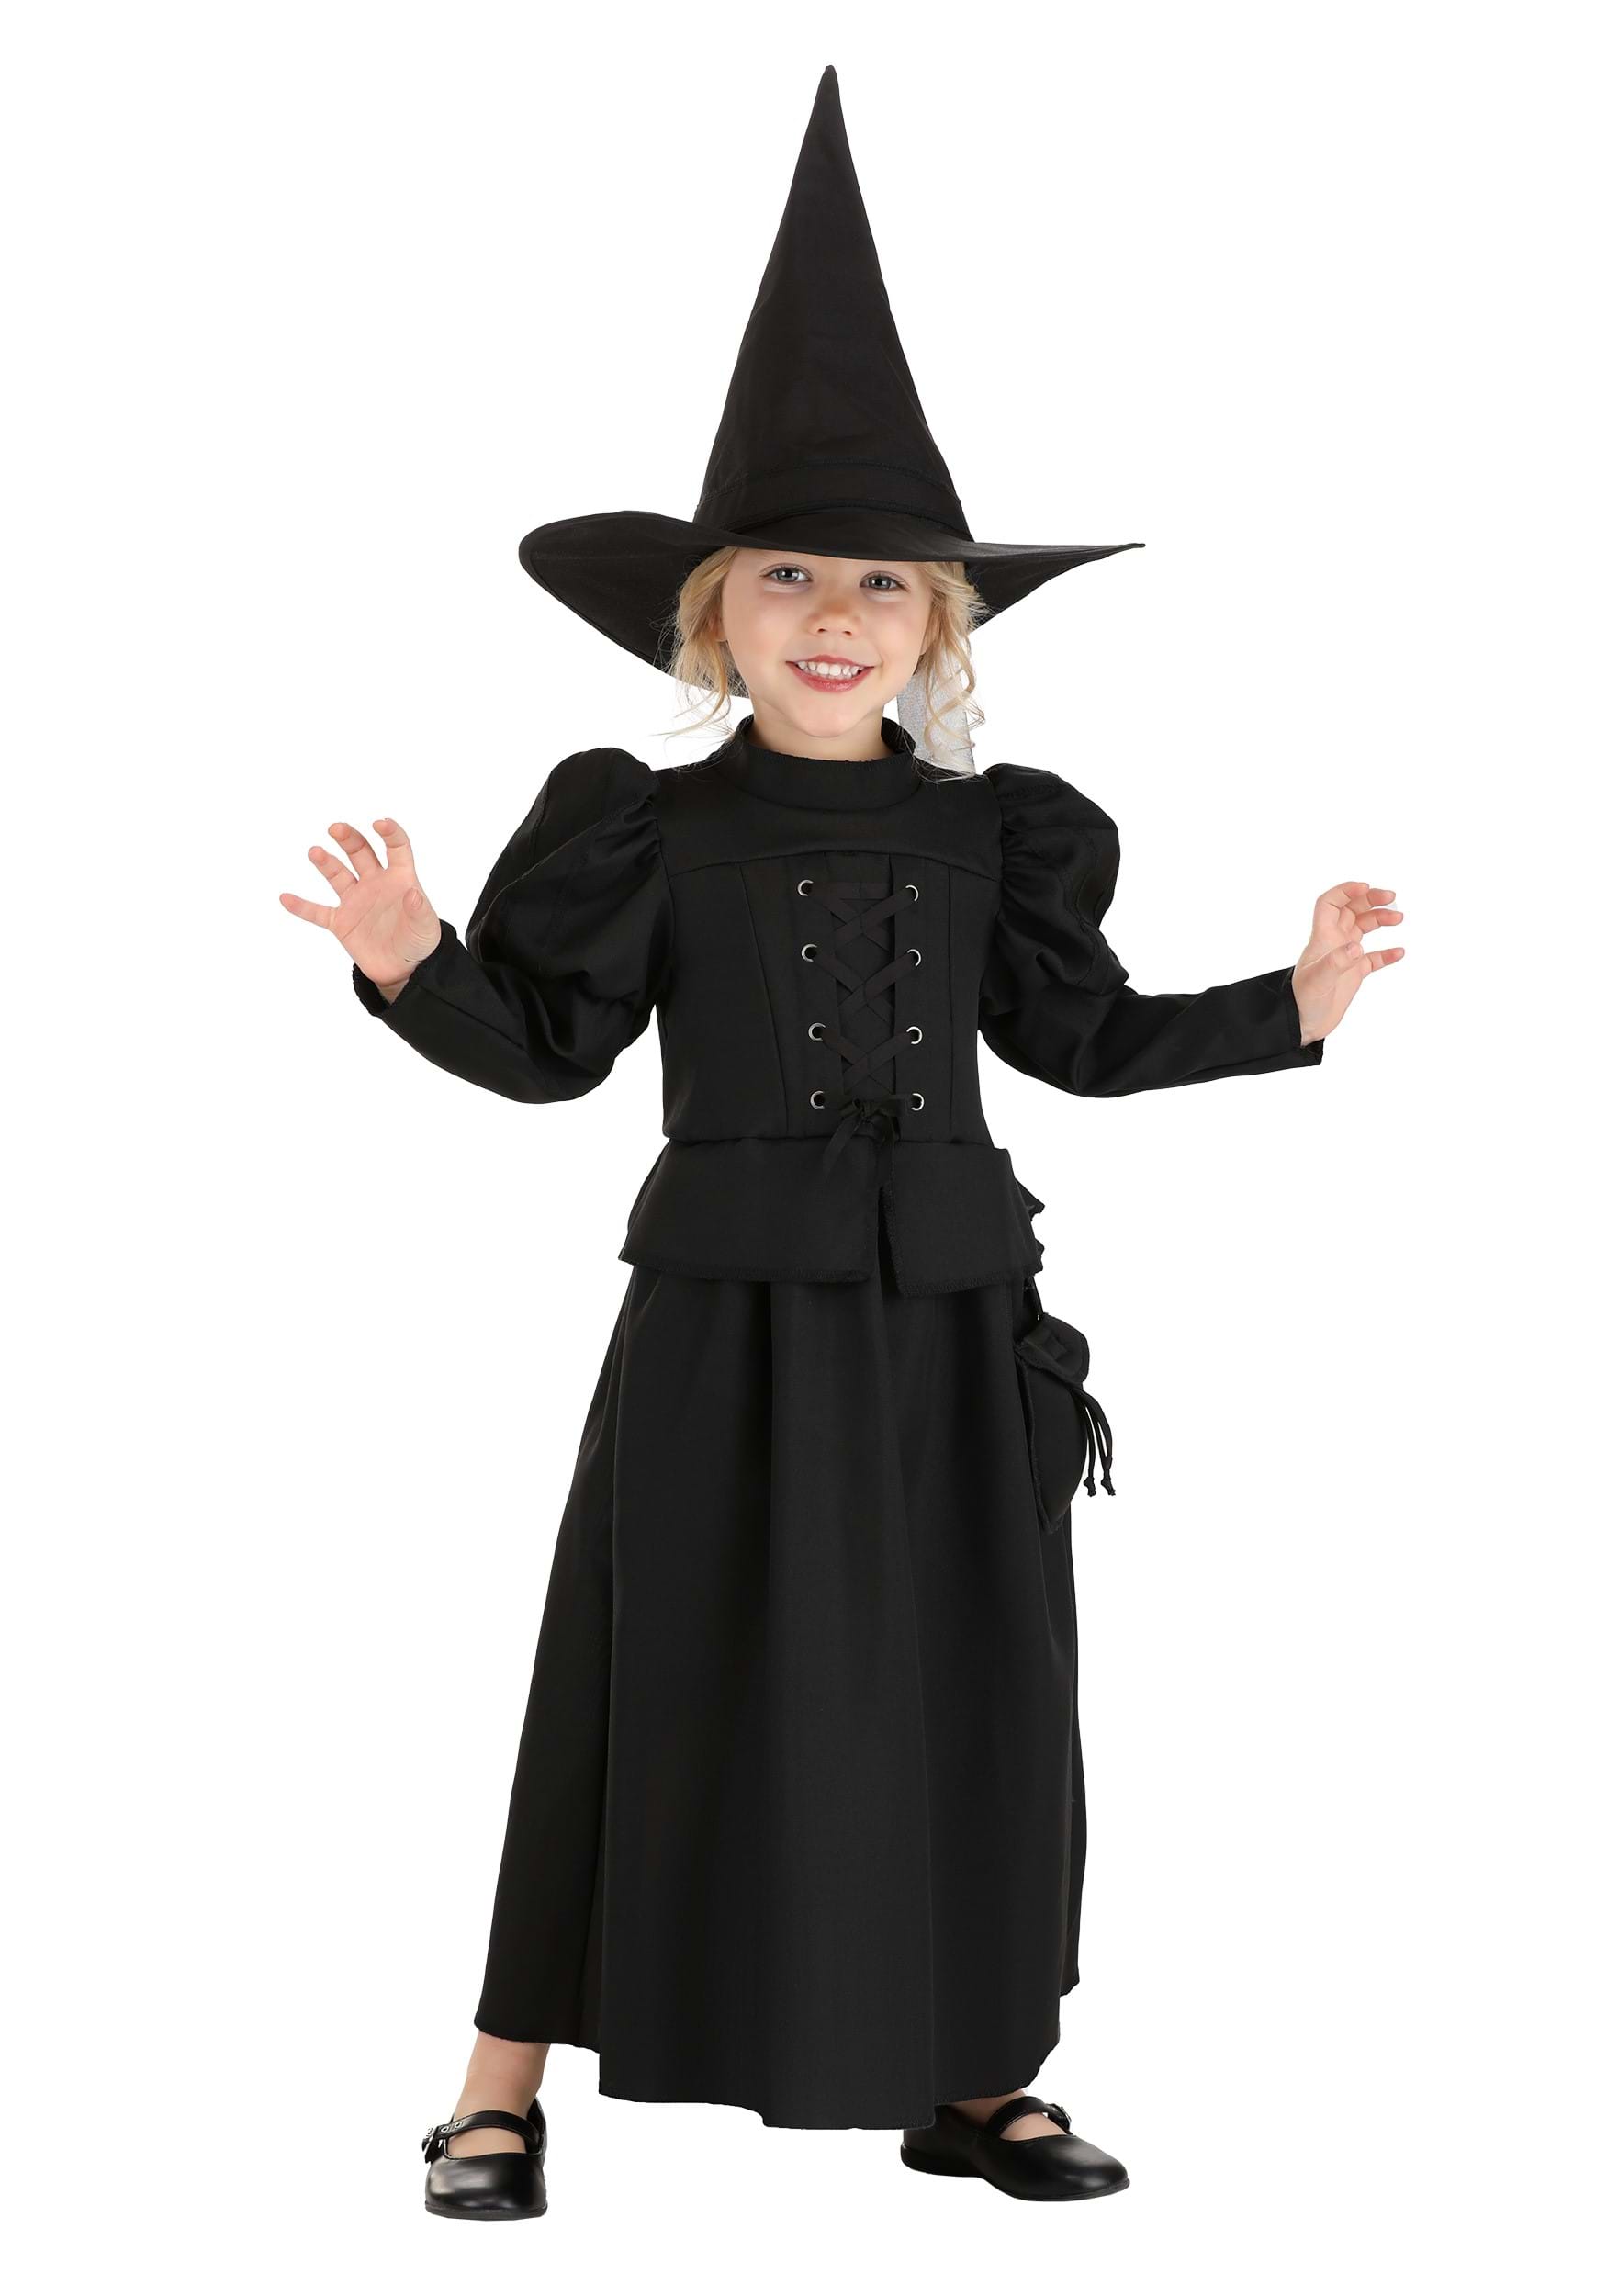 Photos - Fancy Dress Wizard Jerry Leigh Toddler  of Oz Wicked Witch Costume |  Of Oz Costu 